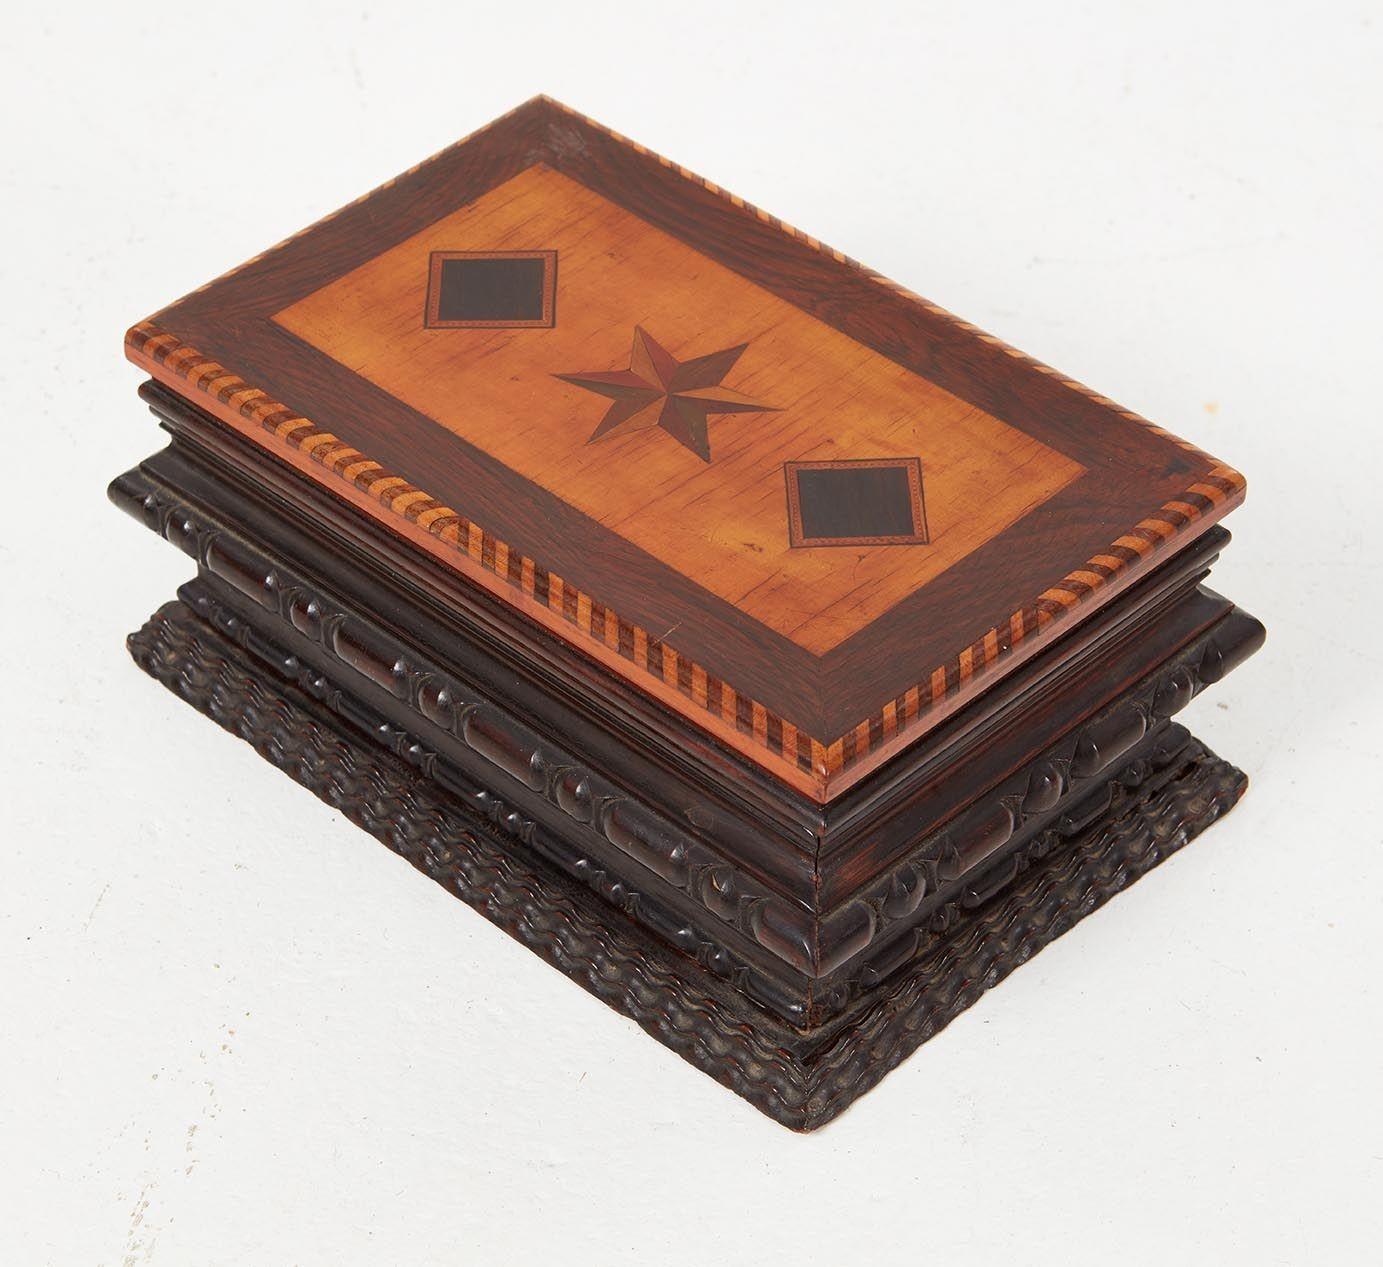 A sailor's ditty box for holding a sailor's valuables (mending needles, thread, pipe tobacco, razor, mementos, etc.) having a mirrored and gilt framed interior lid, with pull-out compartment dividers in two layers below.  Inlaid top of six-point